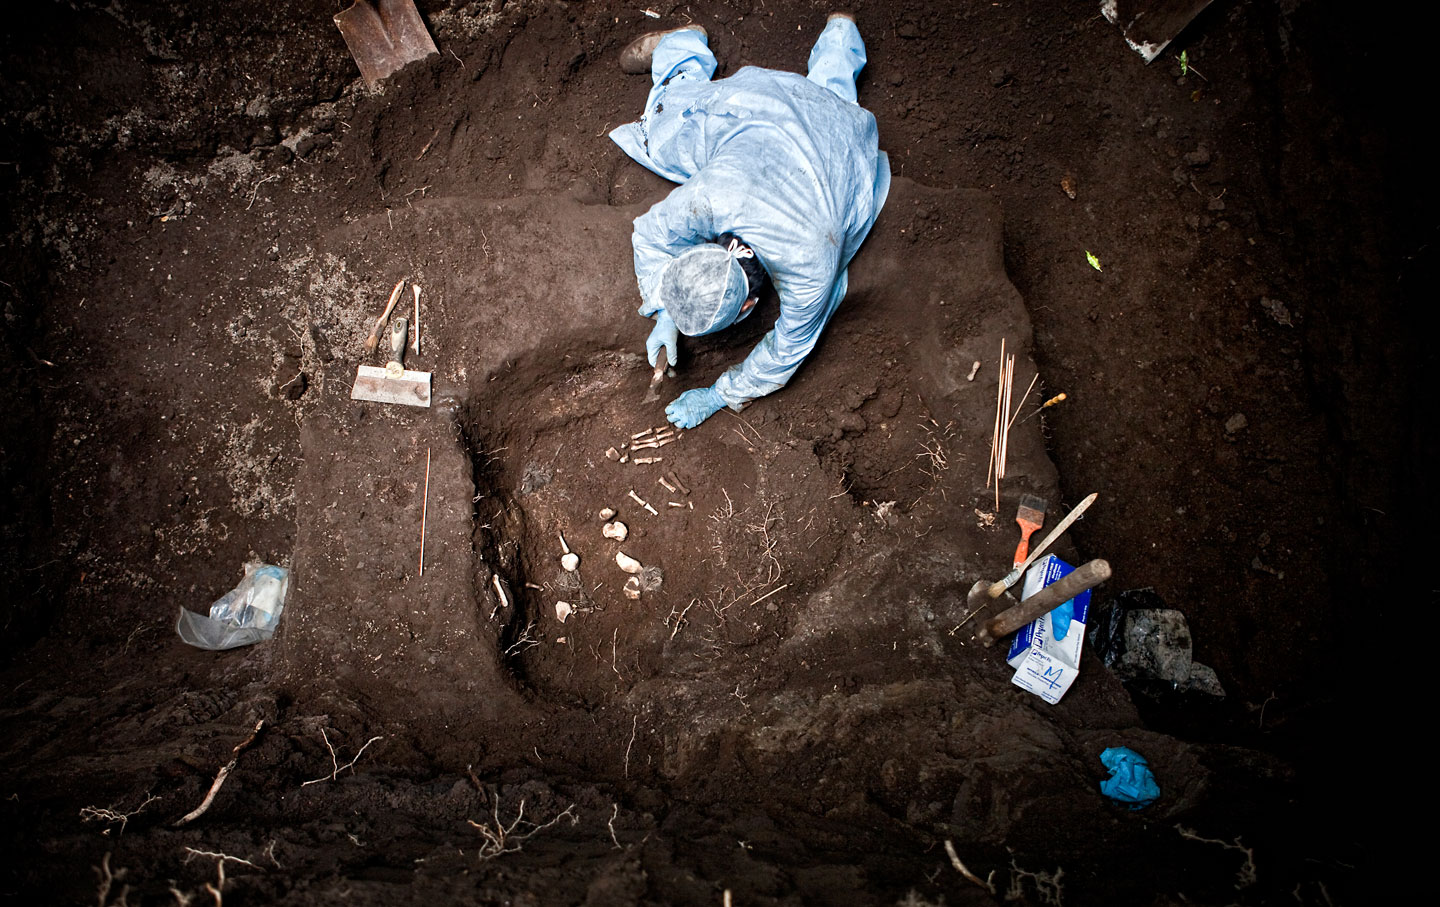 Diary of (Not) Excavating a Mass Grave in El Salvador